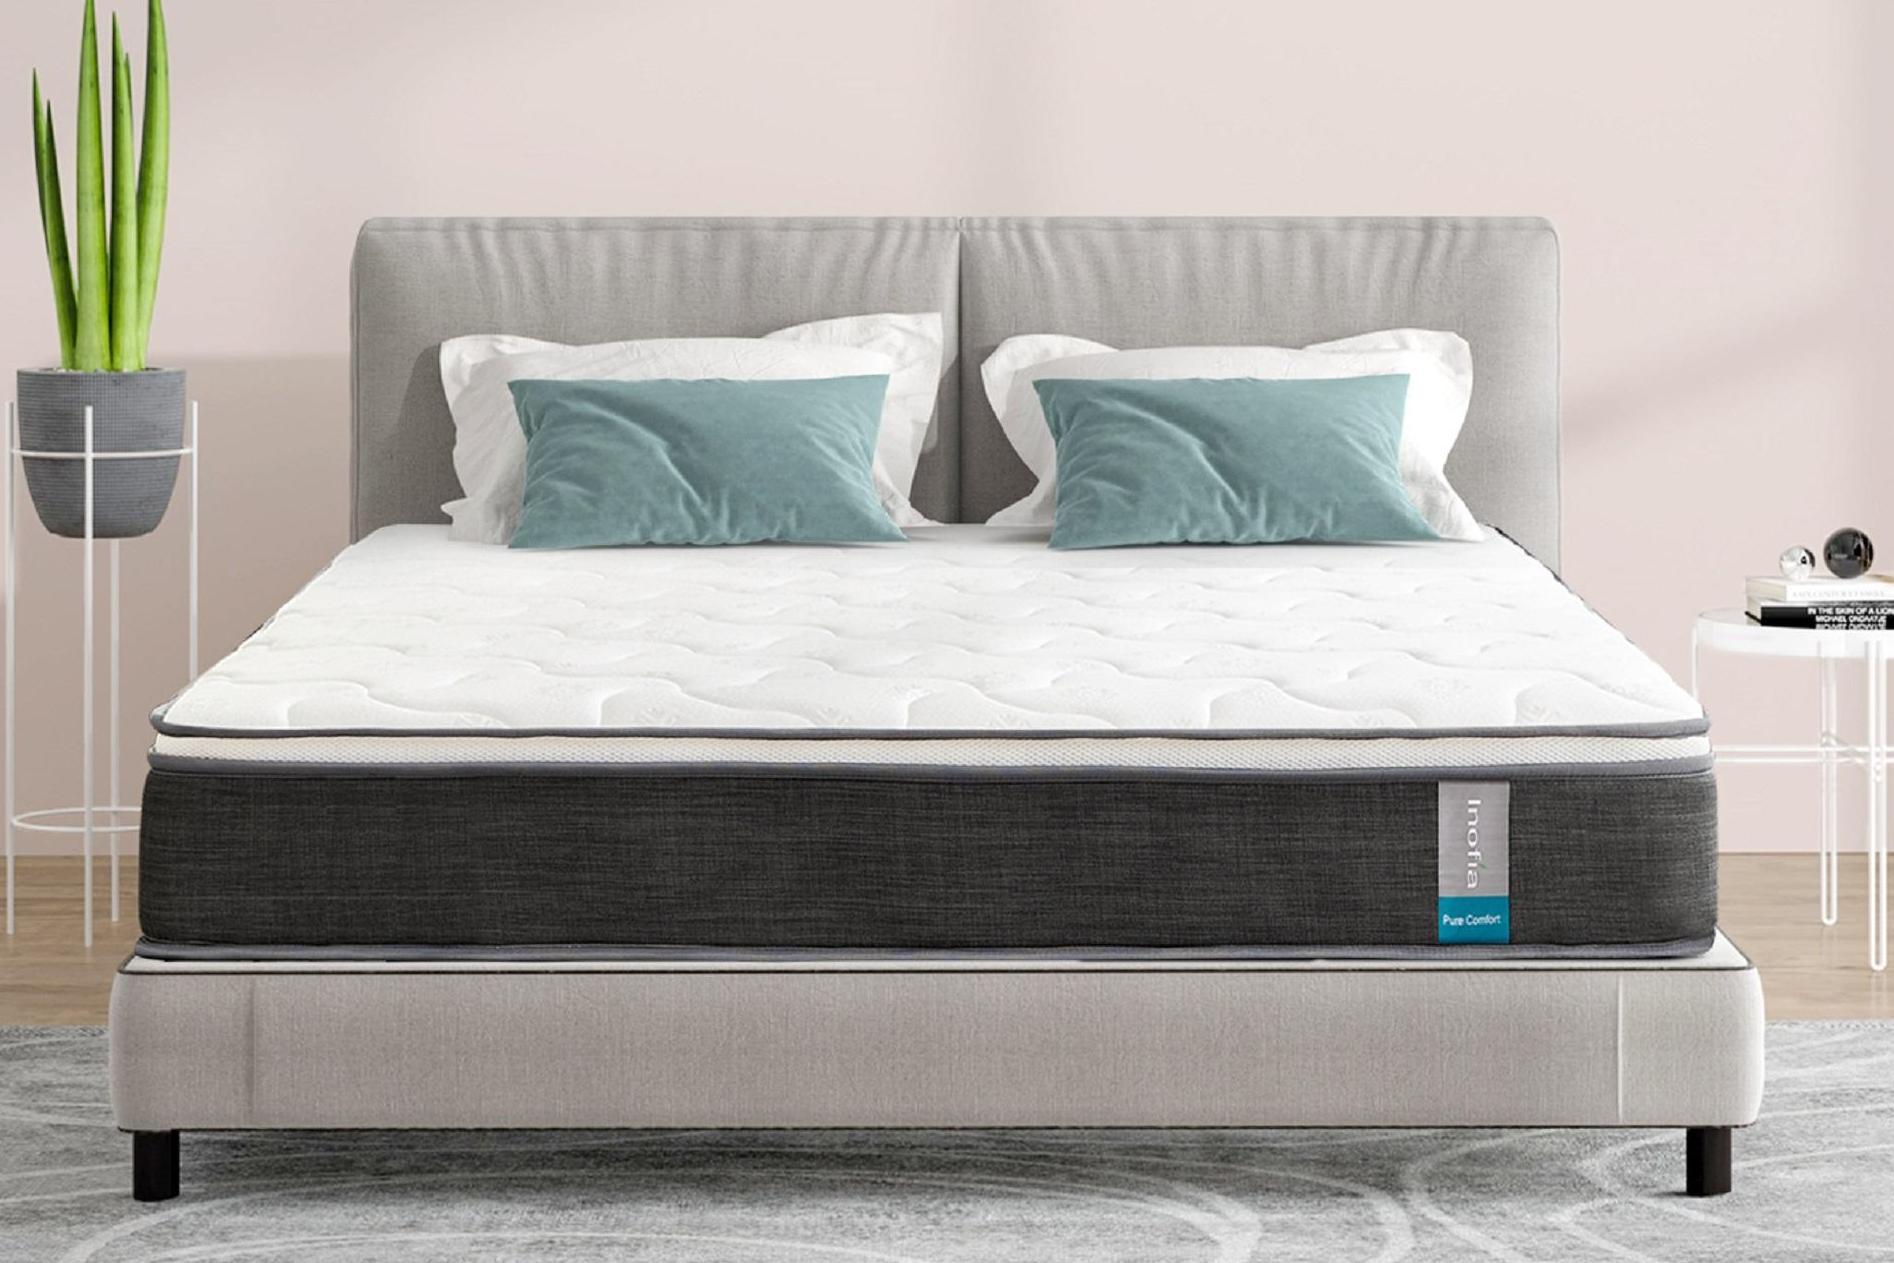 What Is The Whole Sole Purpose Of Buying Mattresses?